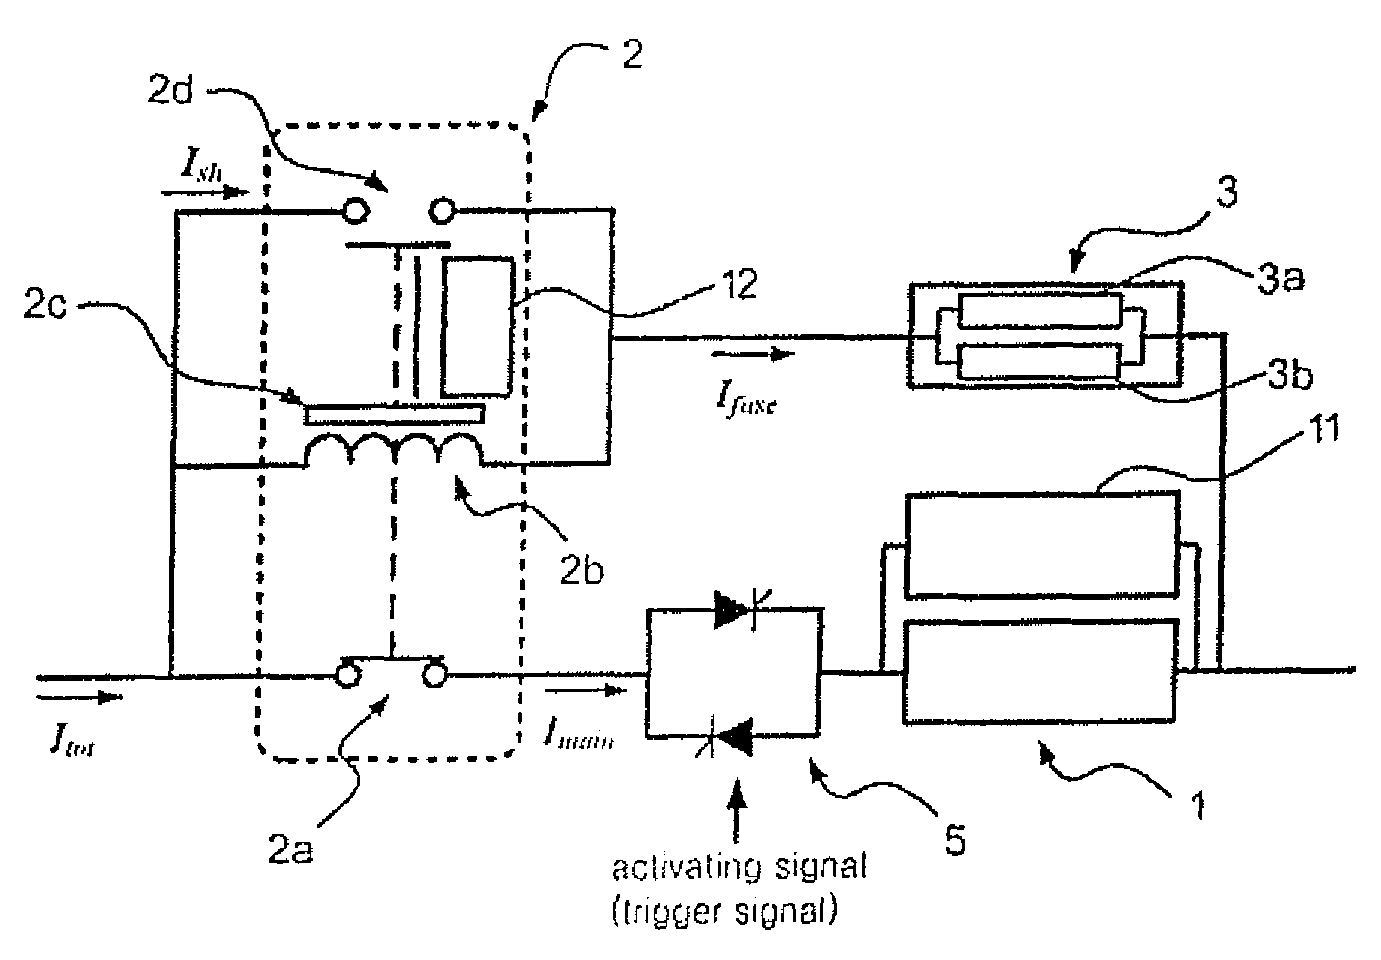 Hybrid-type superconducting fault current limiter